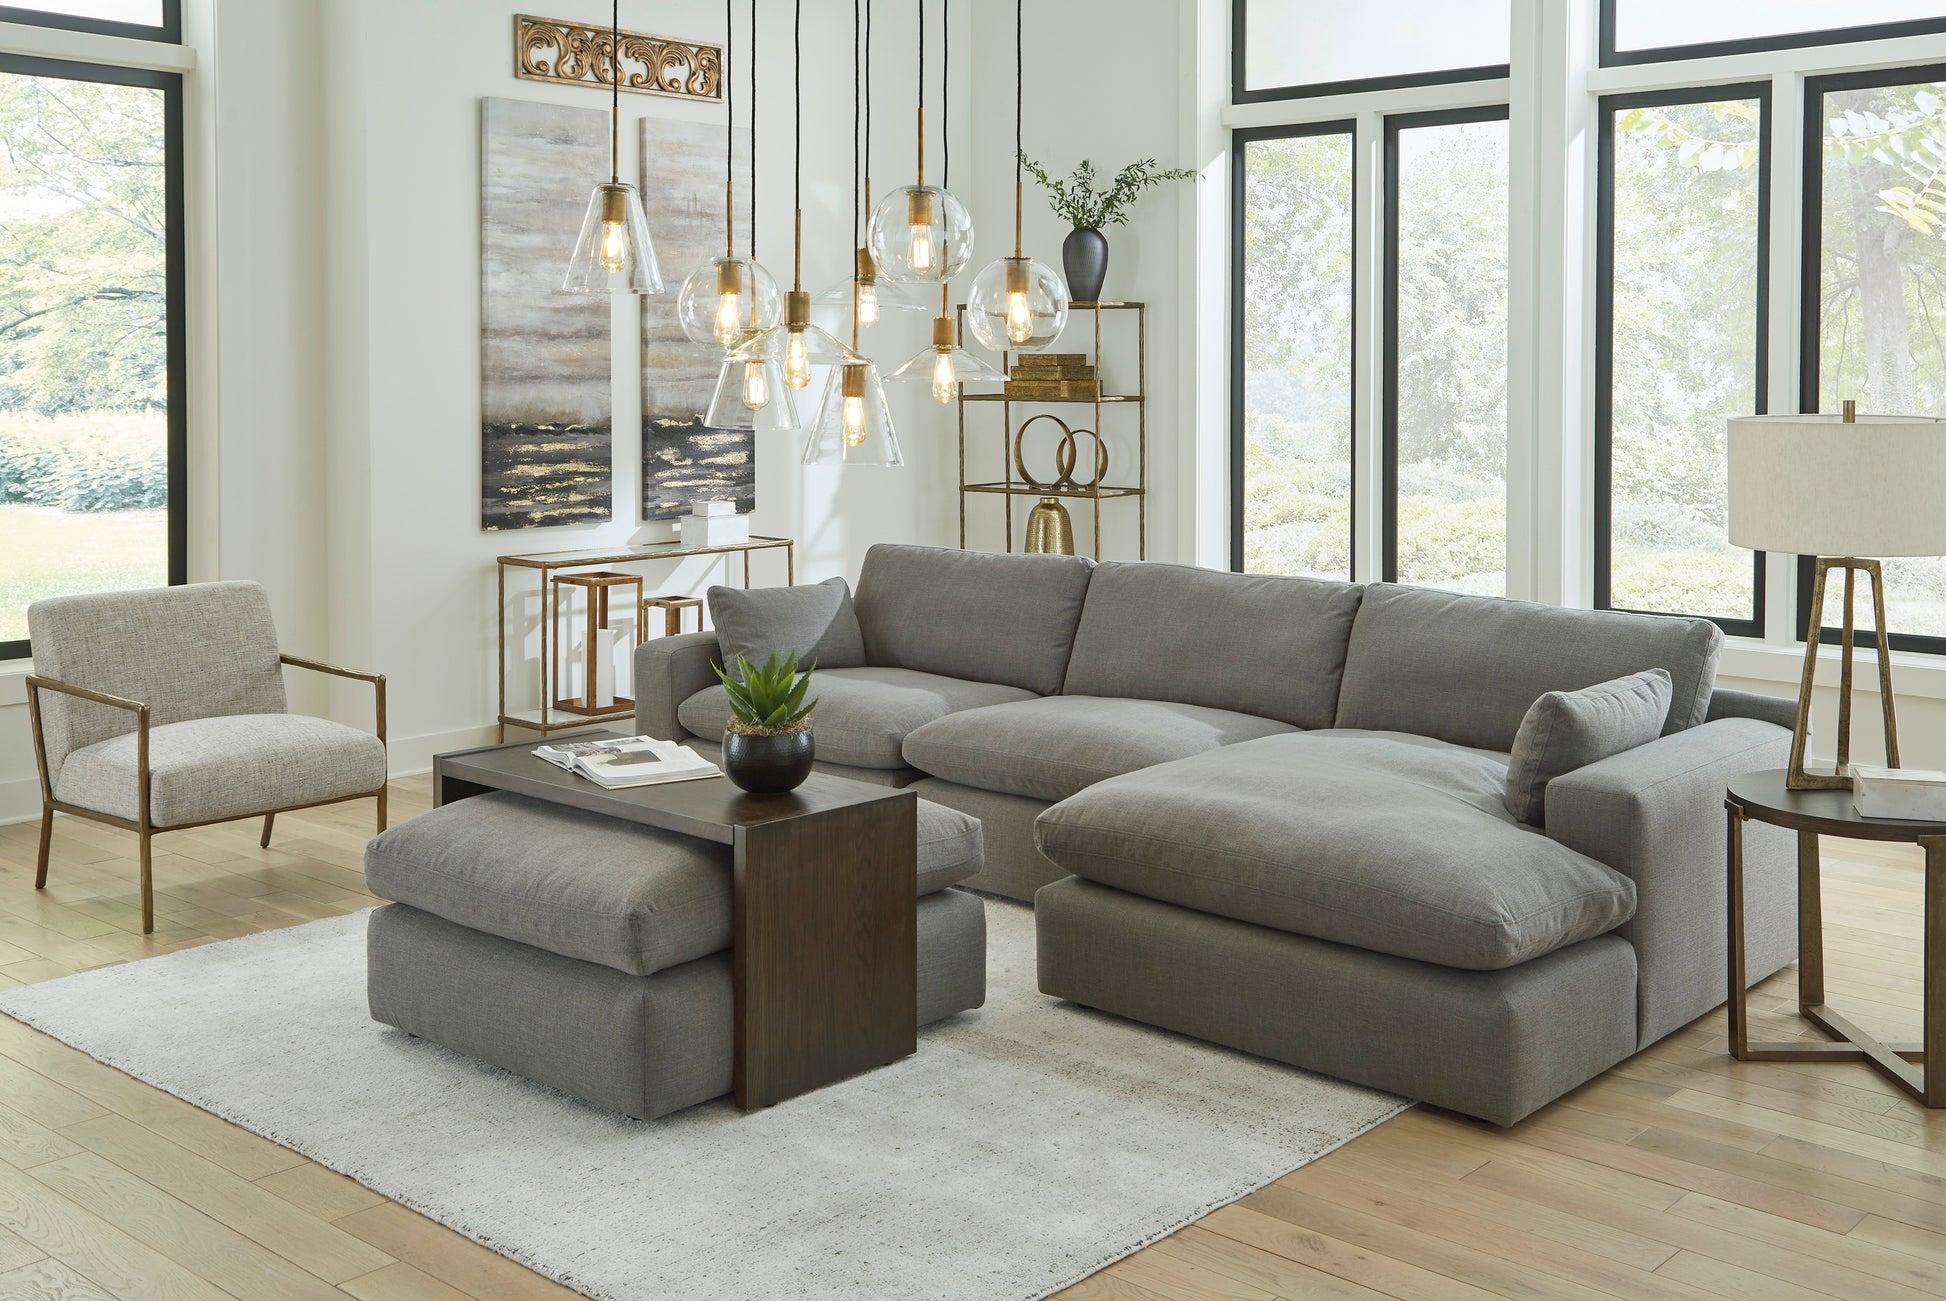 Piece Sectional With Chaise Lounge